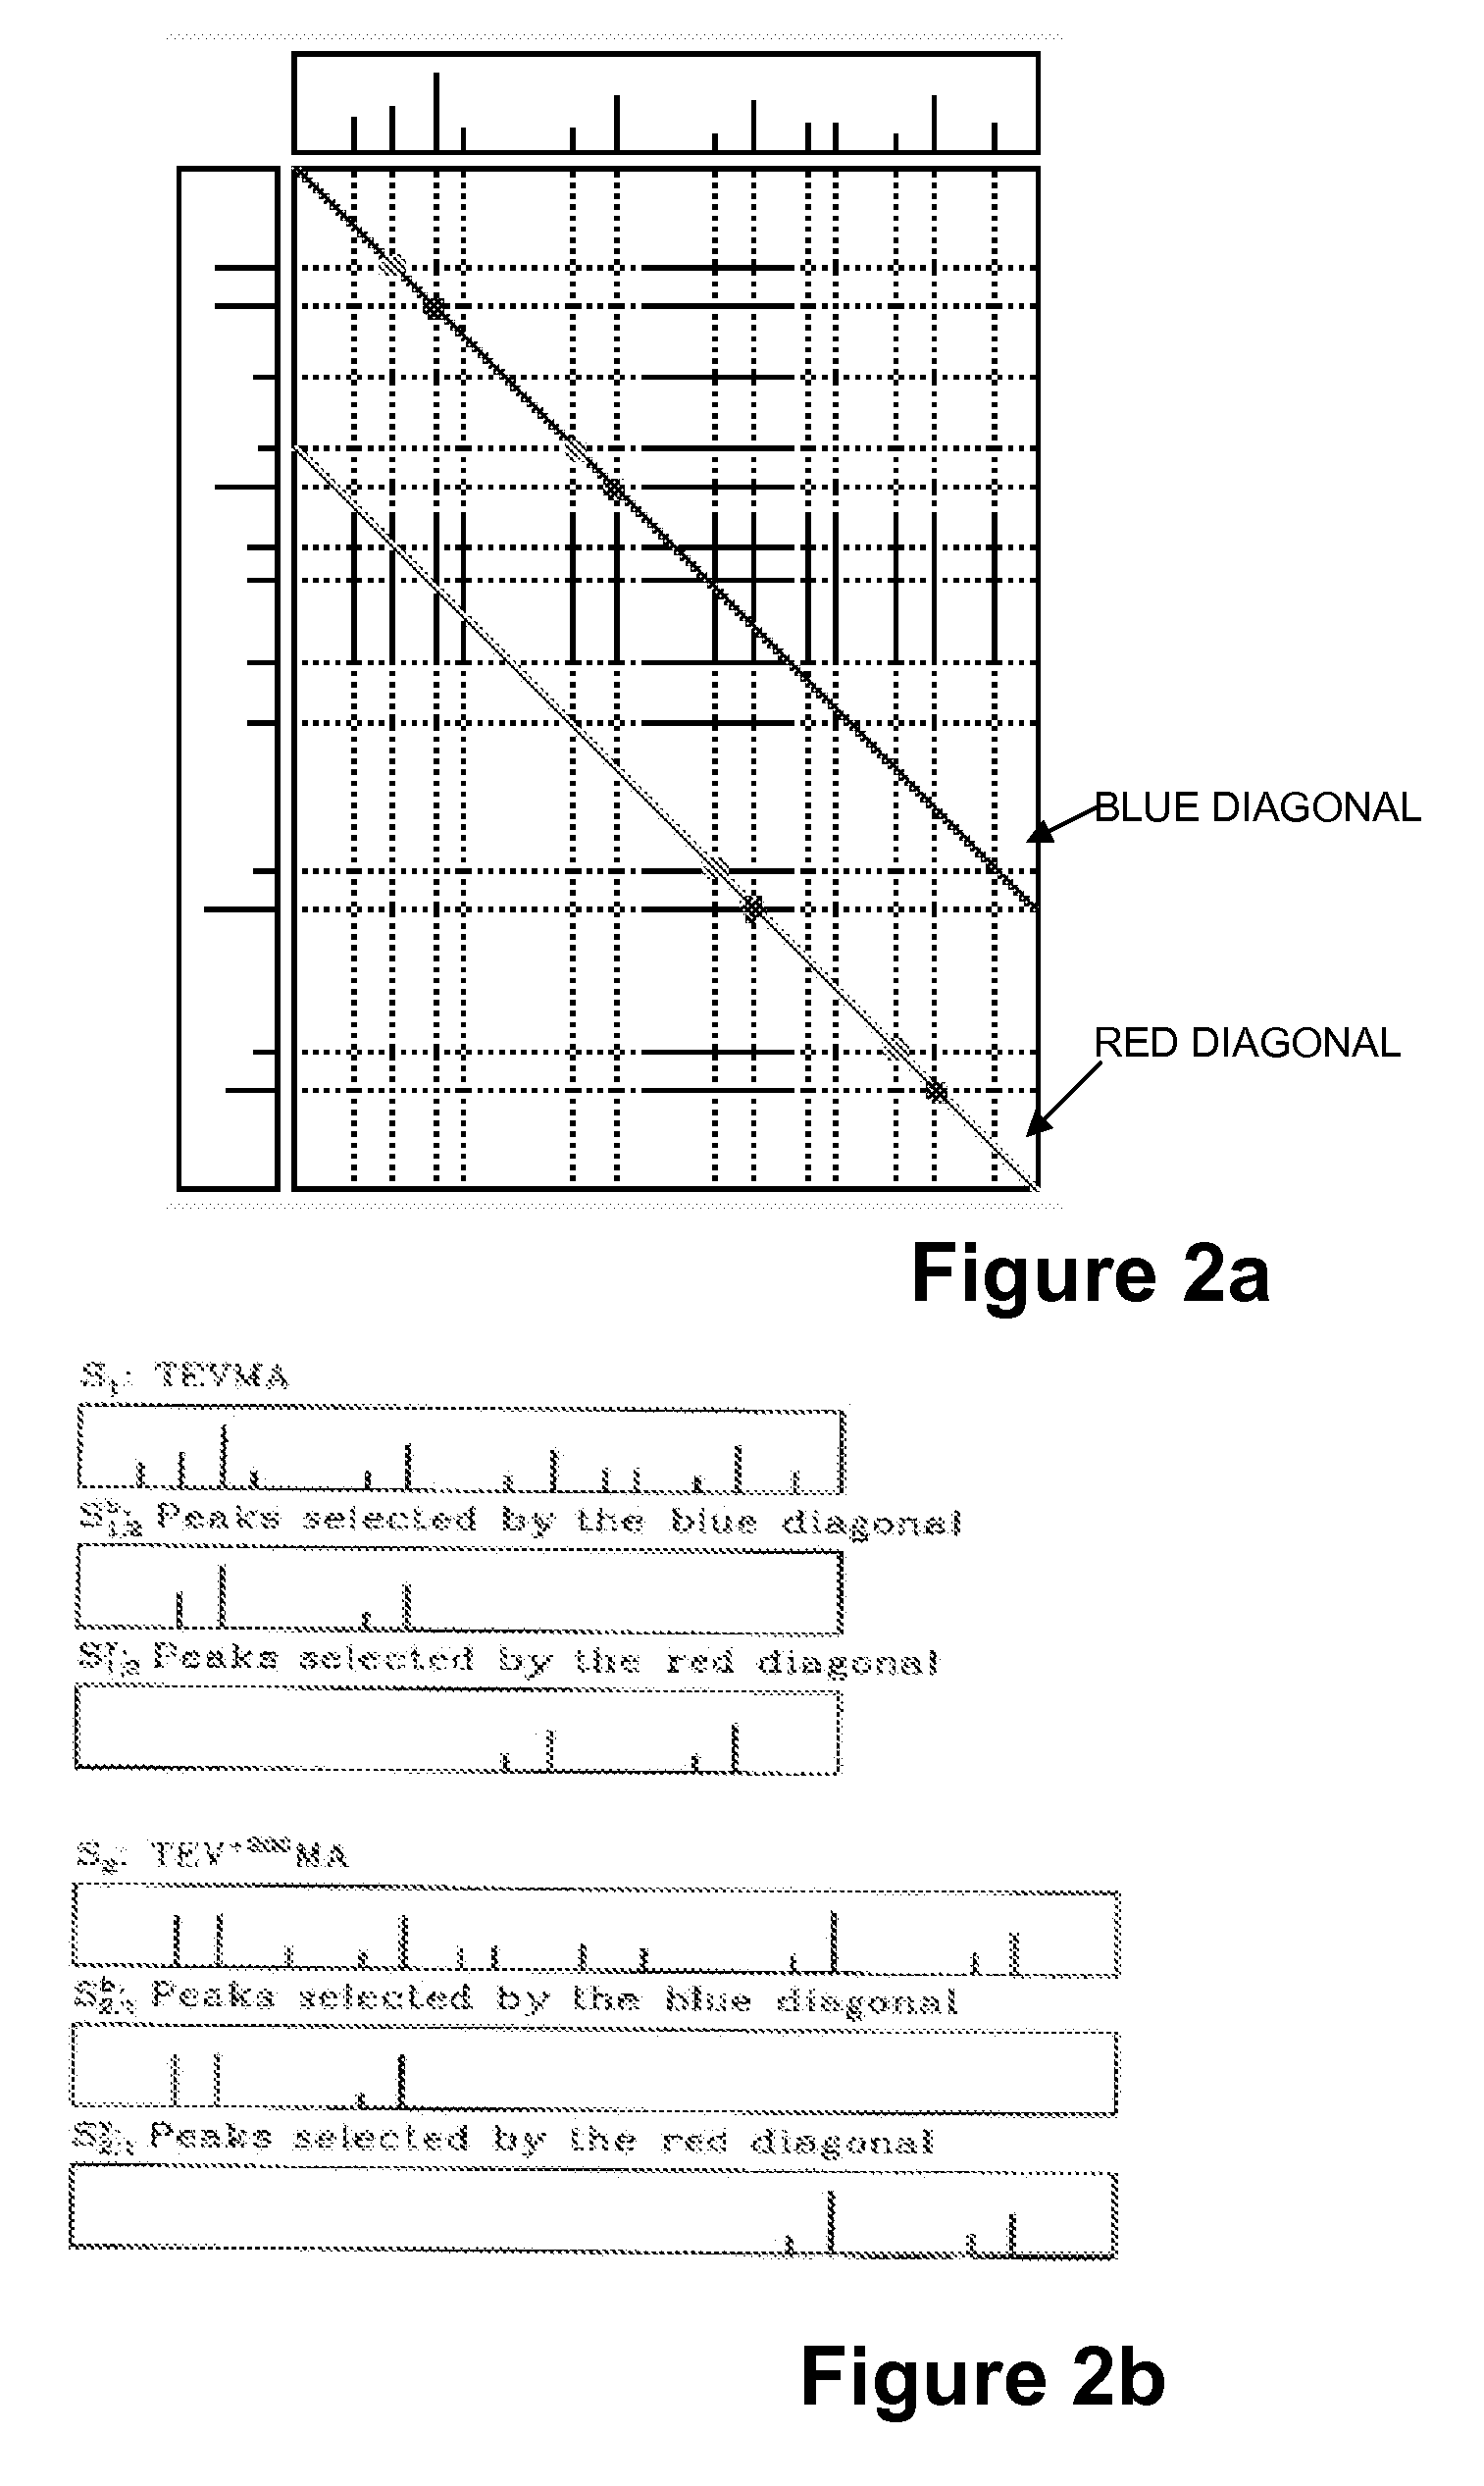 Method for identification and sequencing of proteins